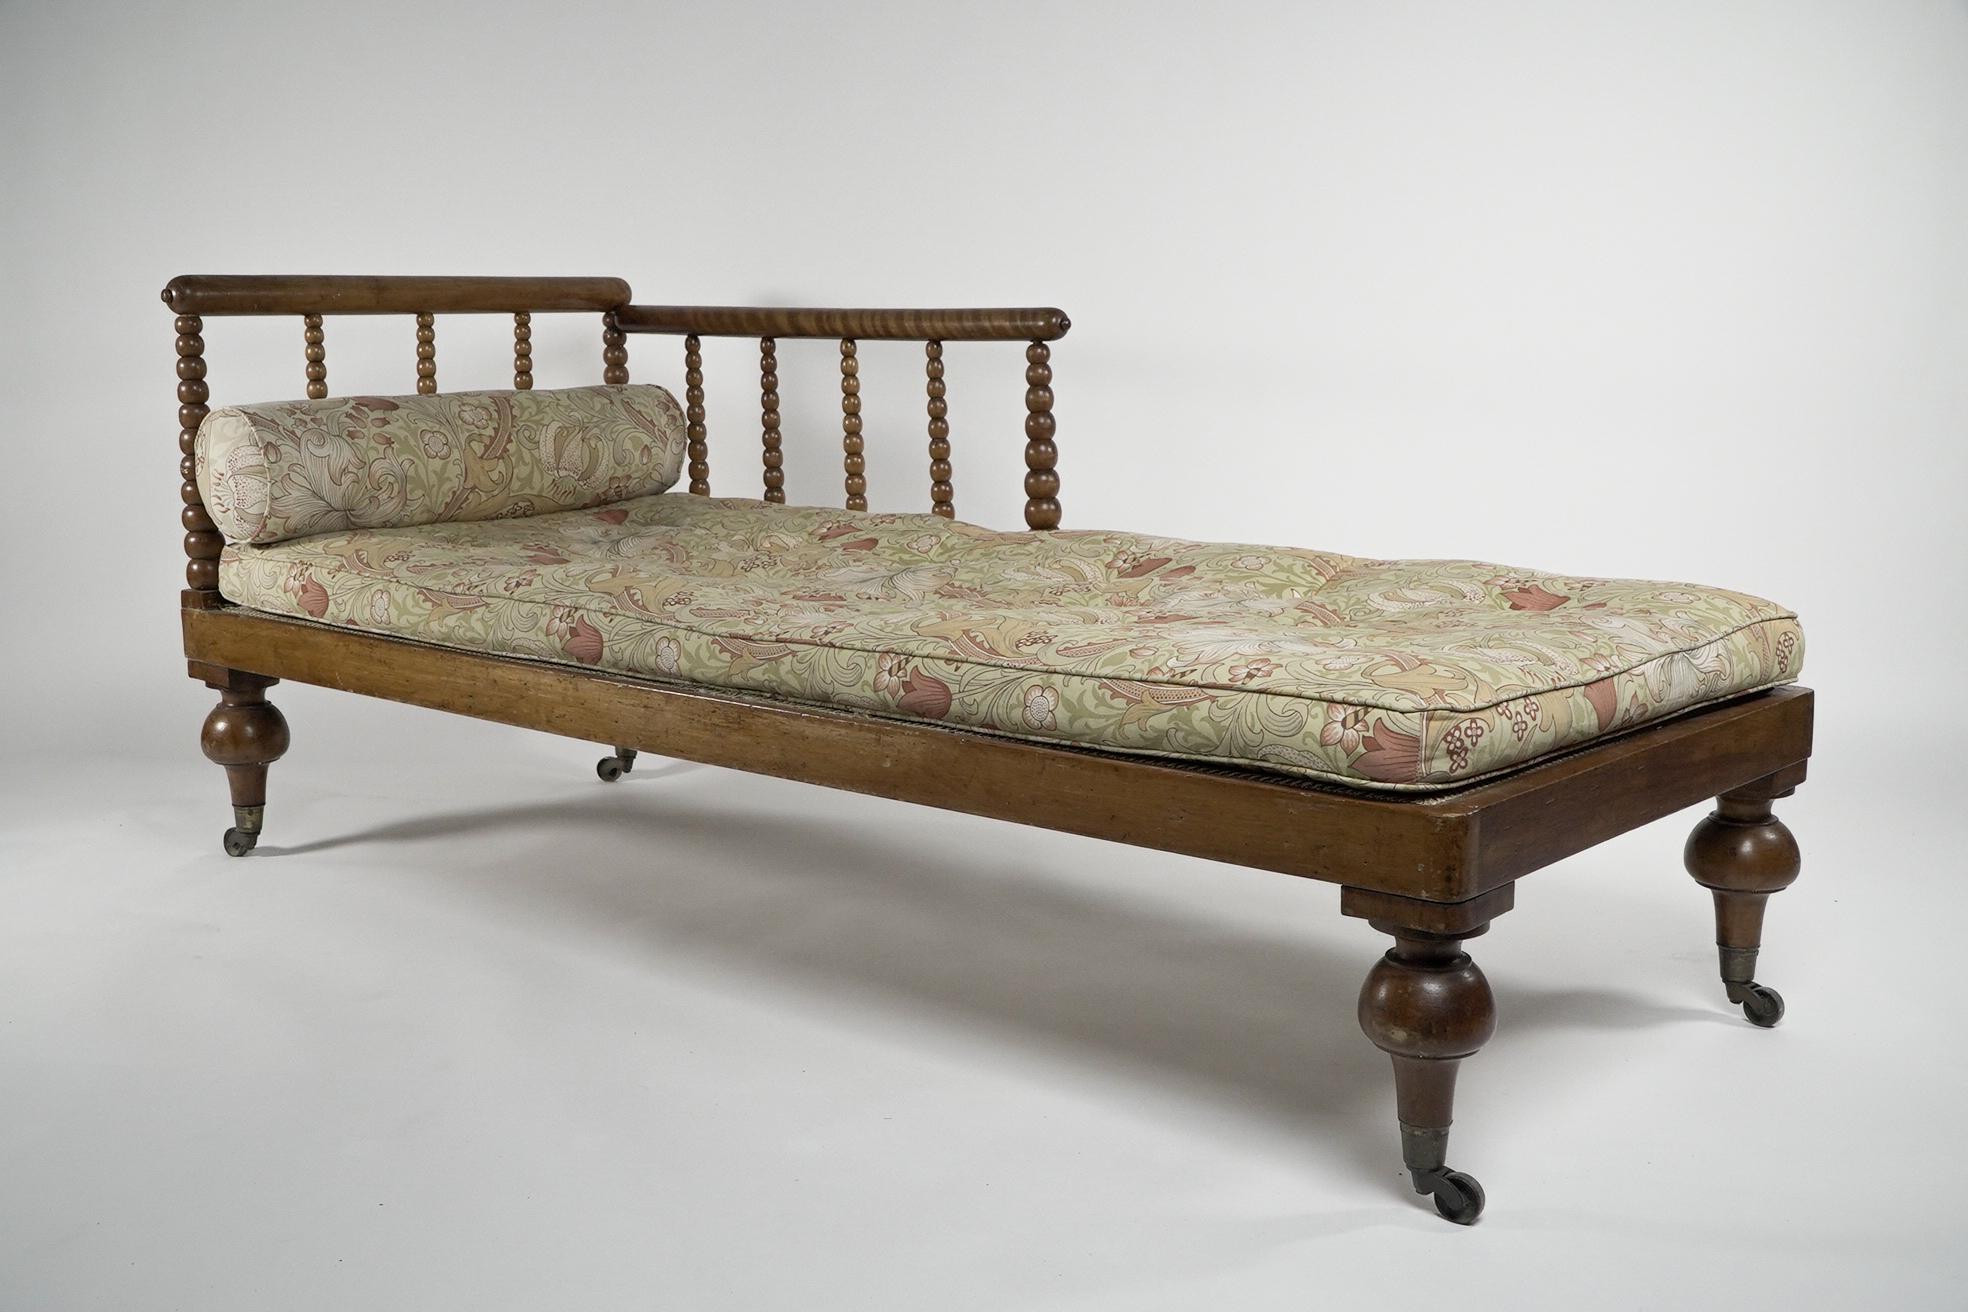 Phillip Webb for Morris and Co attributed. A larger than usual Aesthetic Movement bobbin turned Satinwood chaise lounge or day bed, the upper turned armrests with typical Morris and Co nipples to each end, united with turned ever decreasing in size